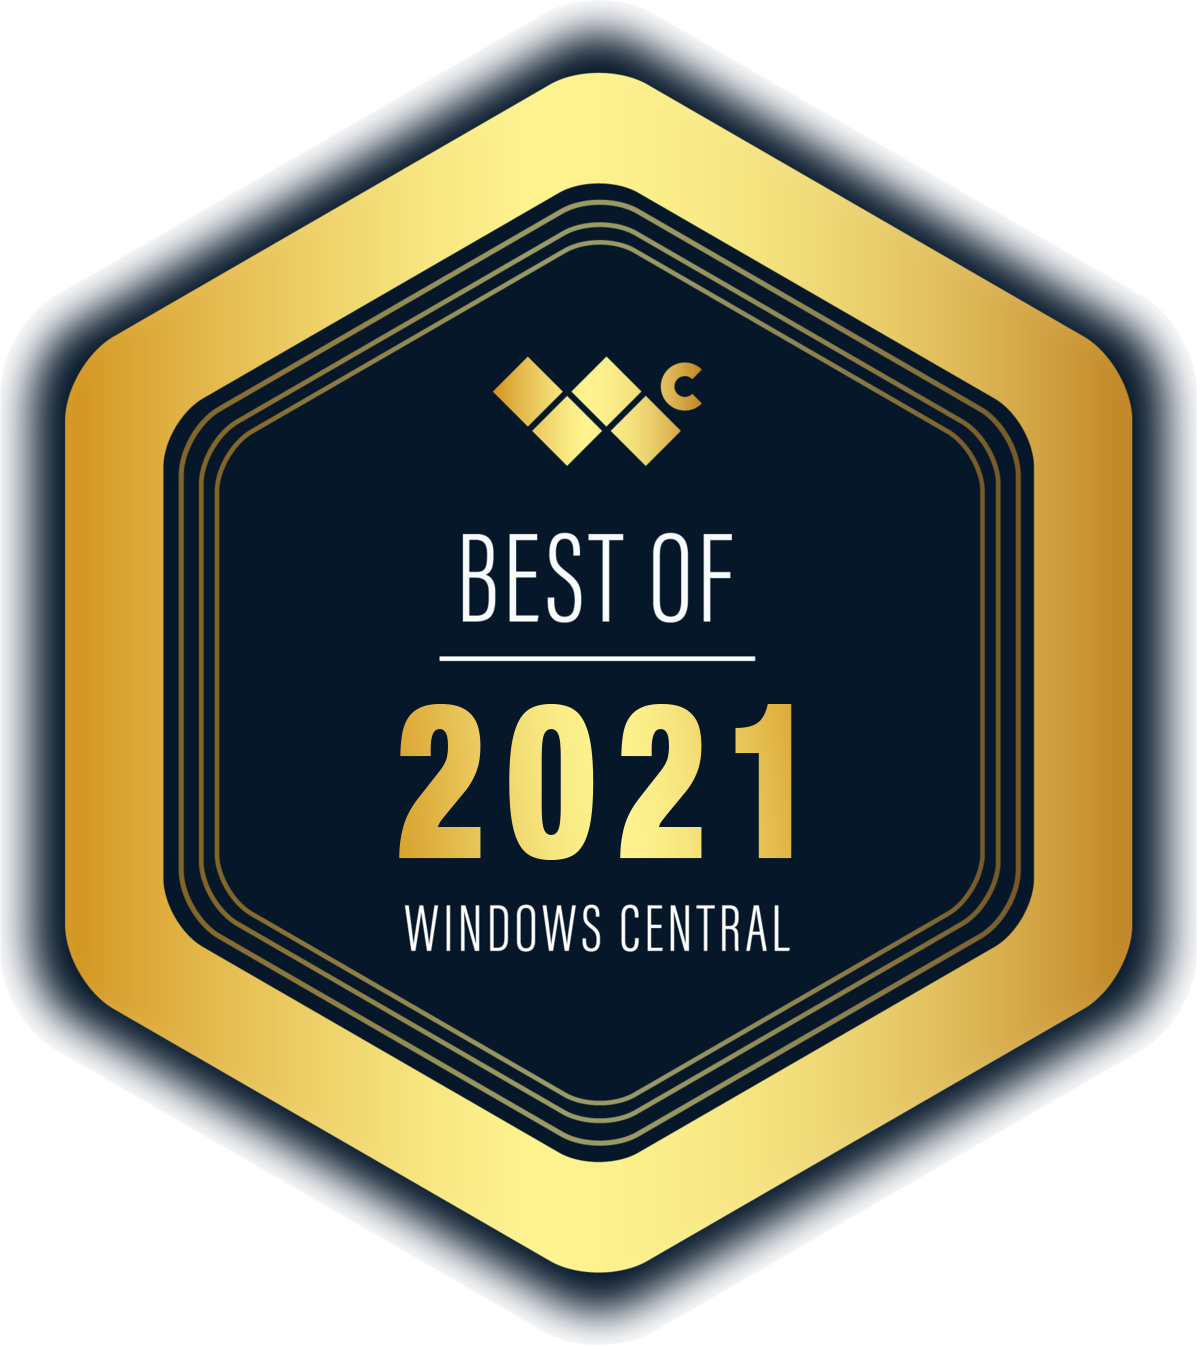 wc-best-of-2021-badge.png